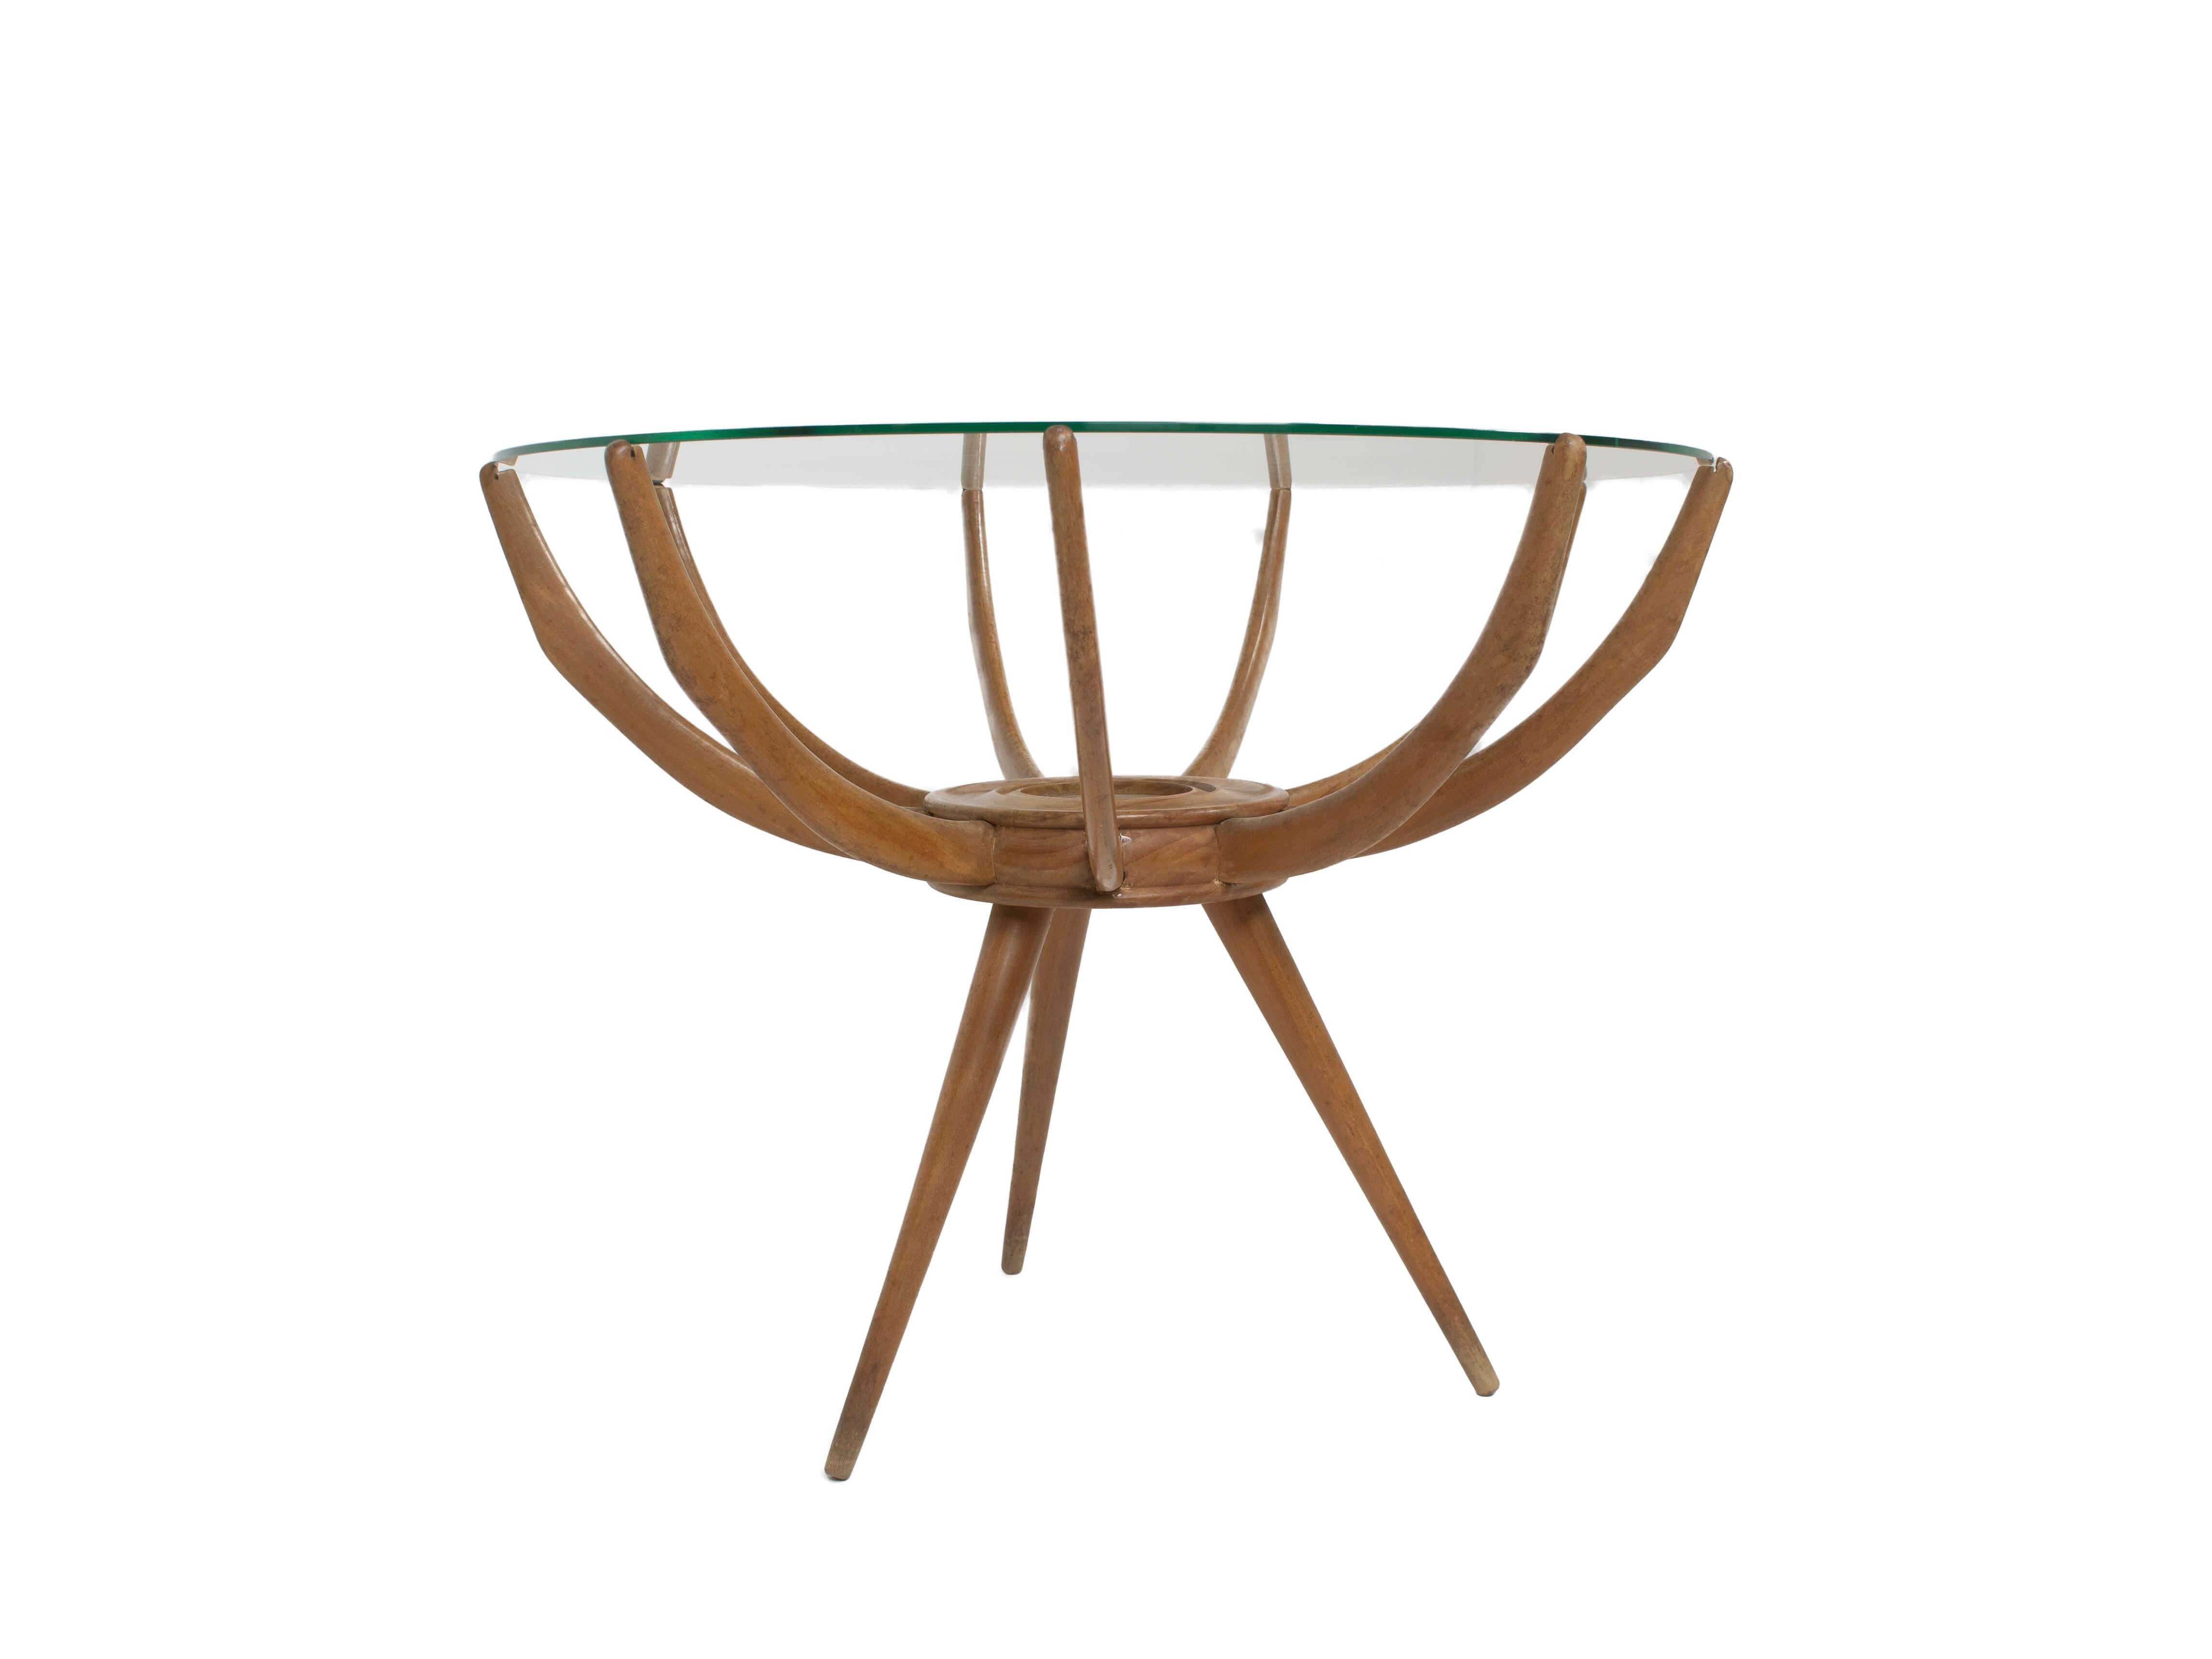 Nice spider leg coffee table by Carlo di Carli, Italy 1950s. This iconic table has three legs and nine wooden 'arms' to keep the glass top steady. The structure of the table reminds of inset legs, therefore the name 'Ragno' or Spider Table. The